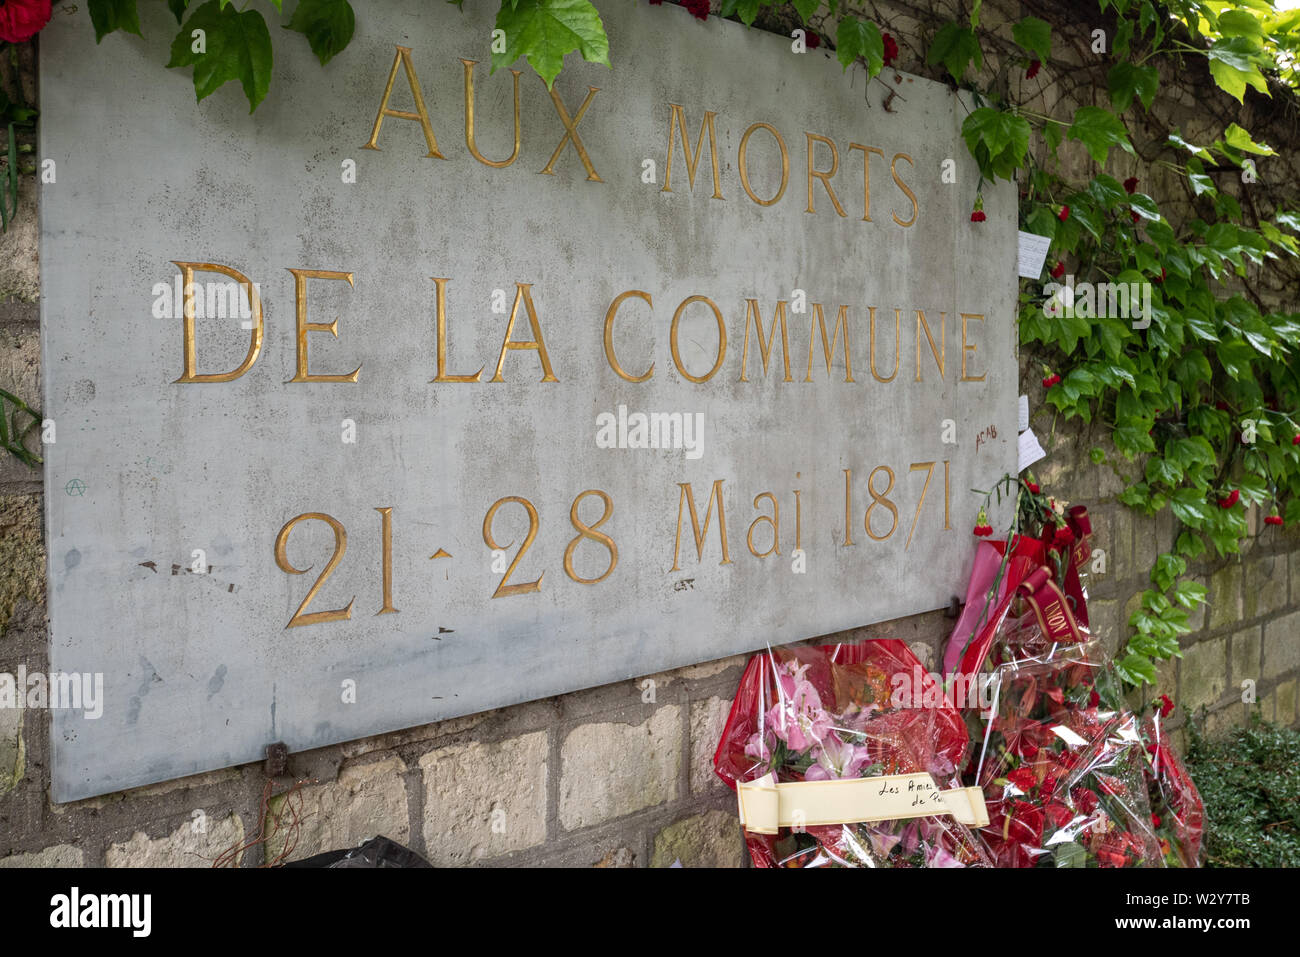 Paris, France - May 28, 2019: the communards wall at the Pere Lachaise Cemetery. The wall became the symbol of the people's struggle for their liberty. Stock Photo